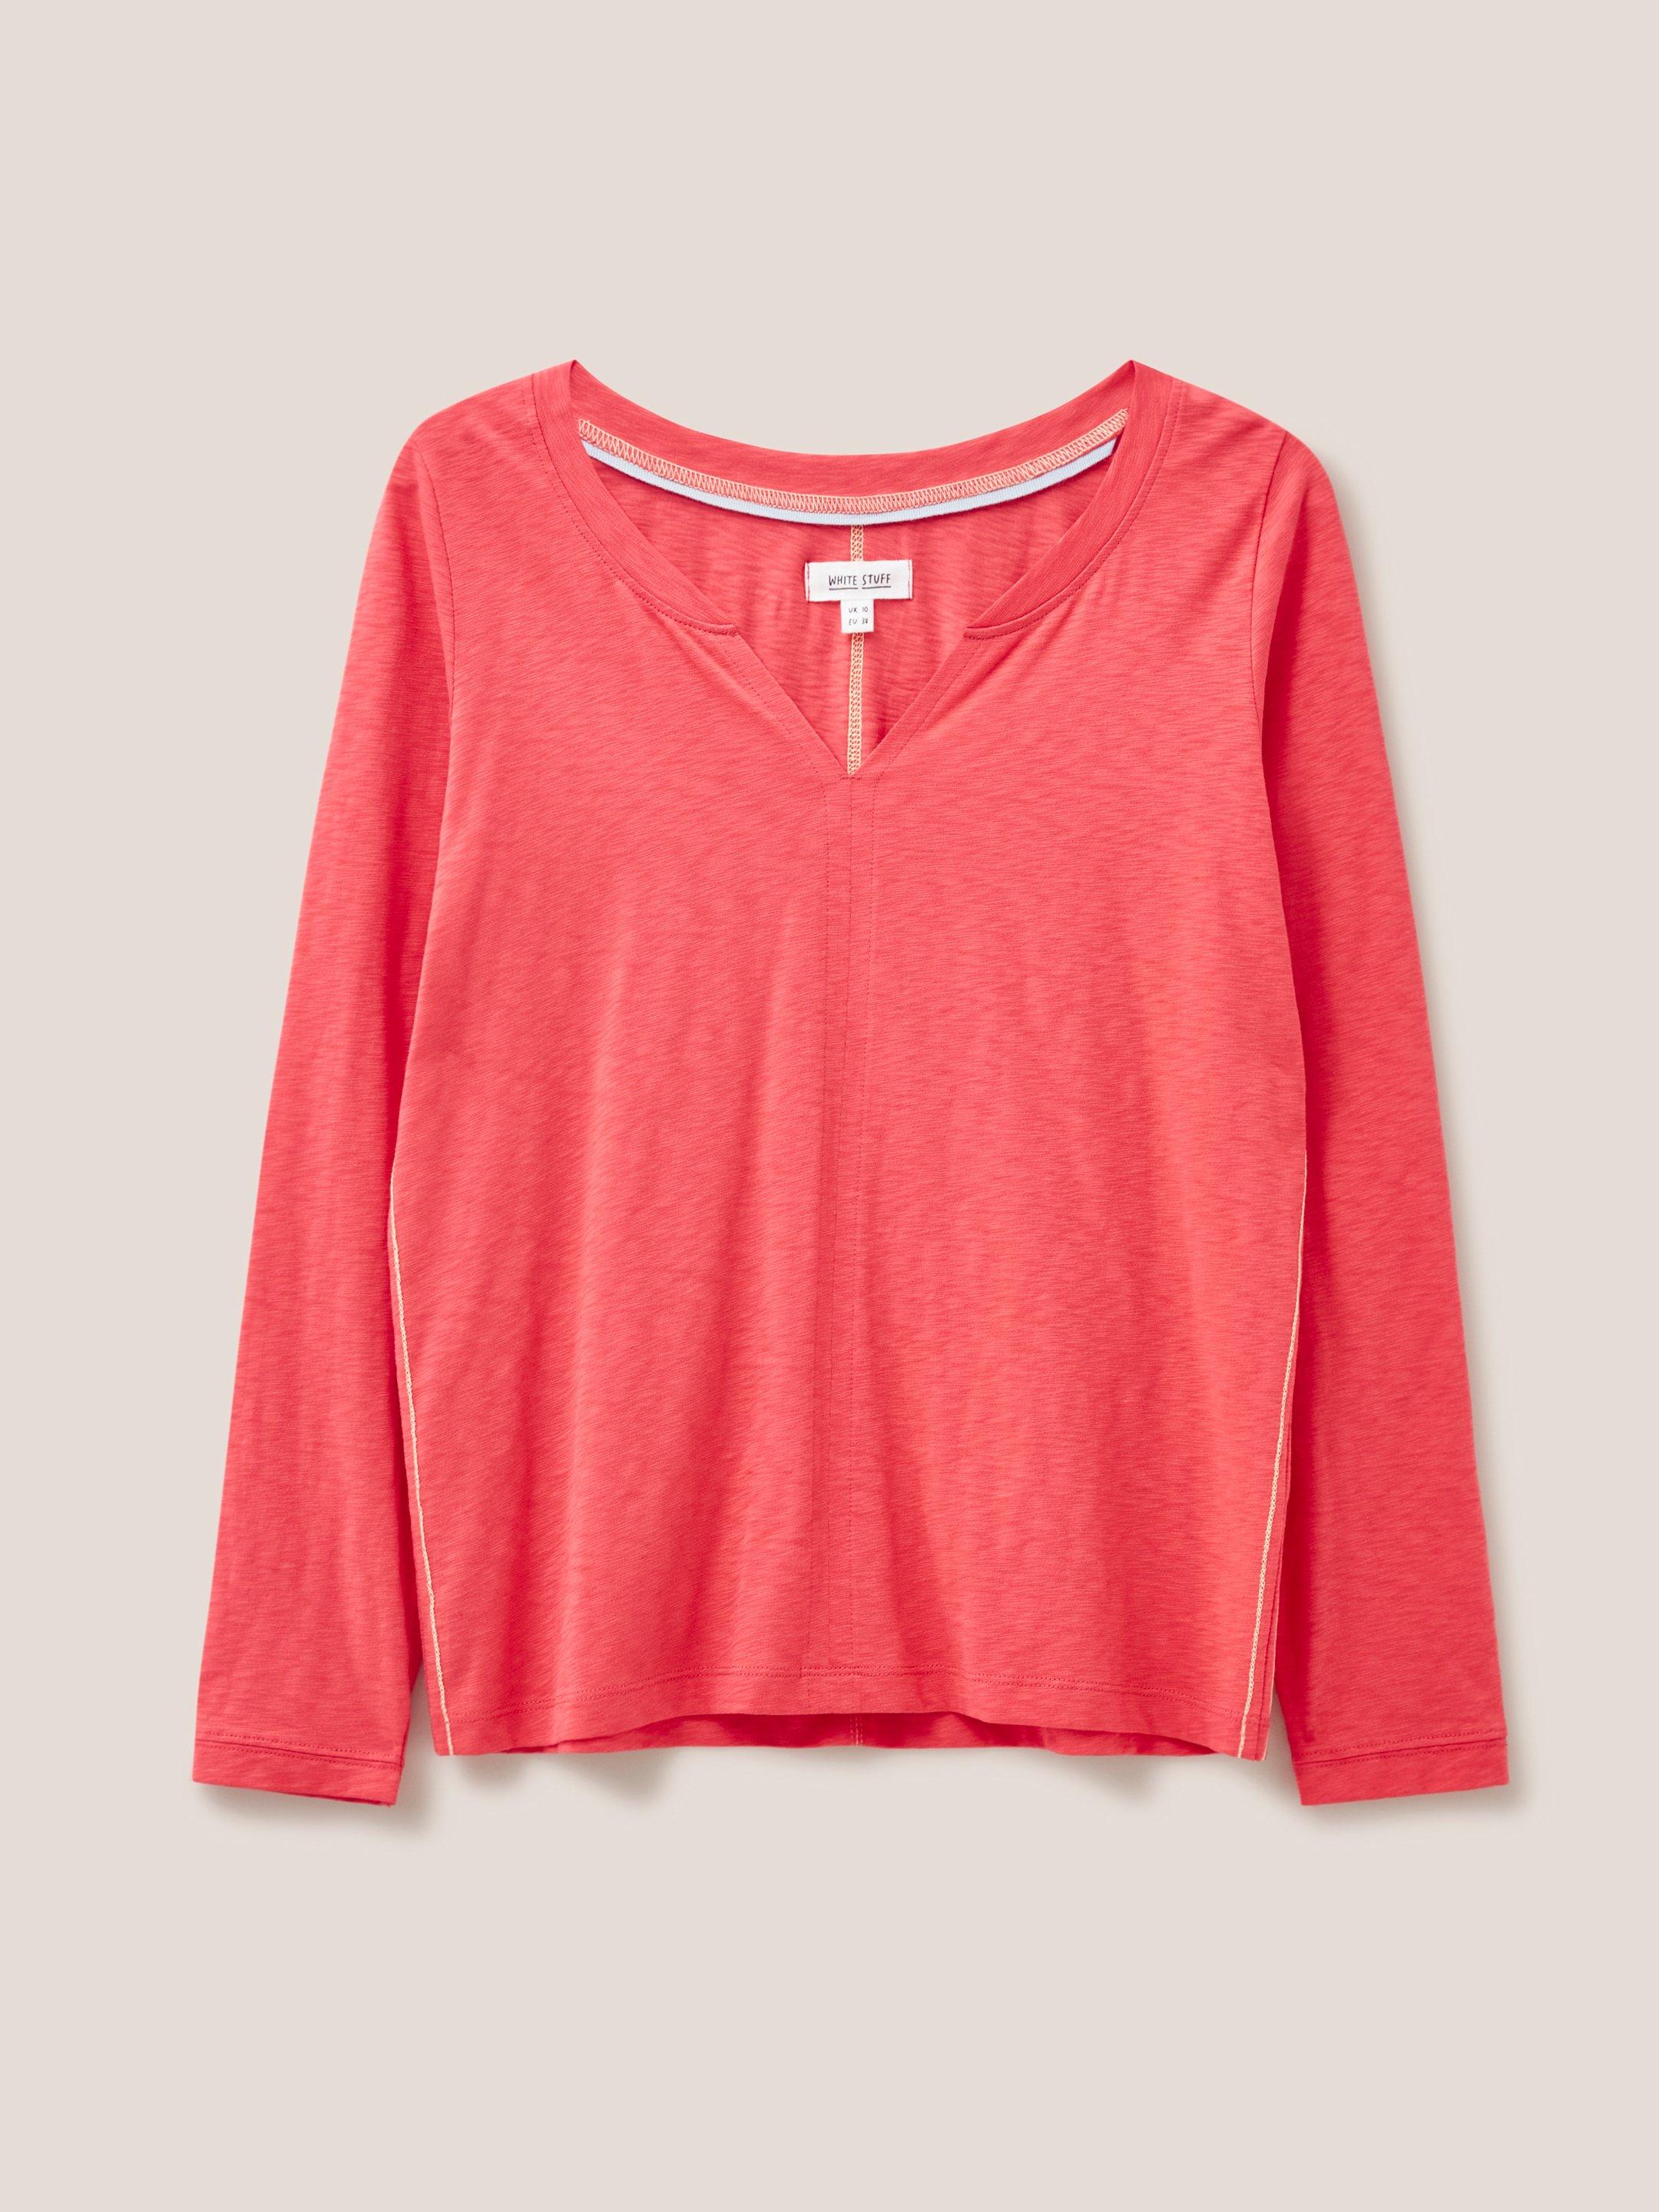 Nelly Long Sleeve T-Shirt in BRT PINK - FLAT FRONT